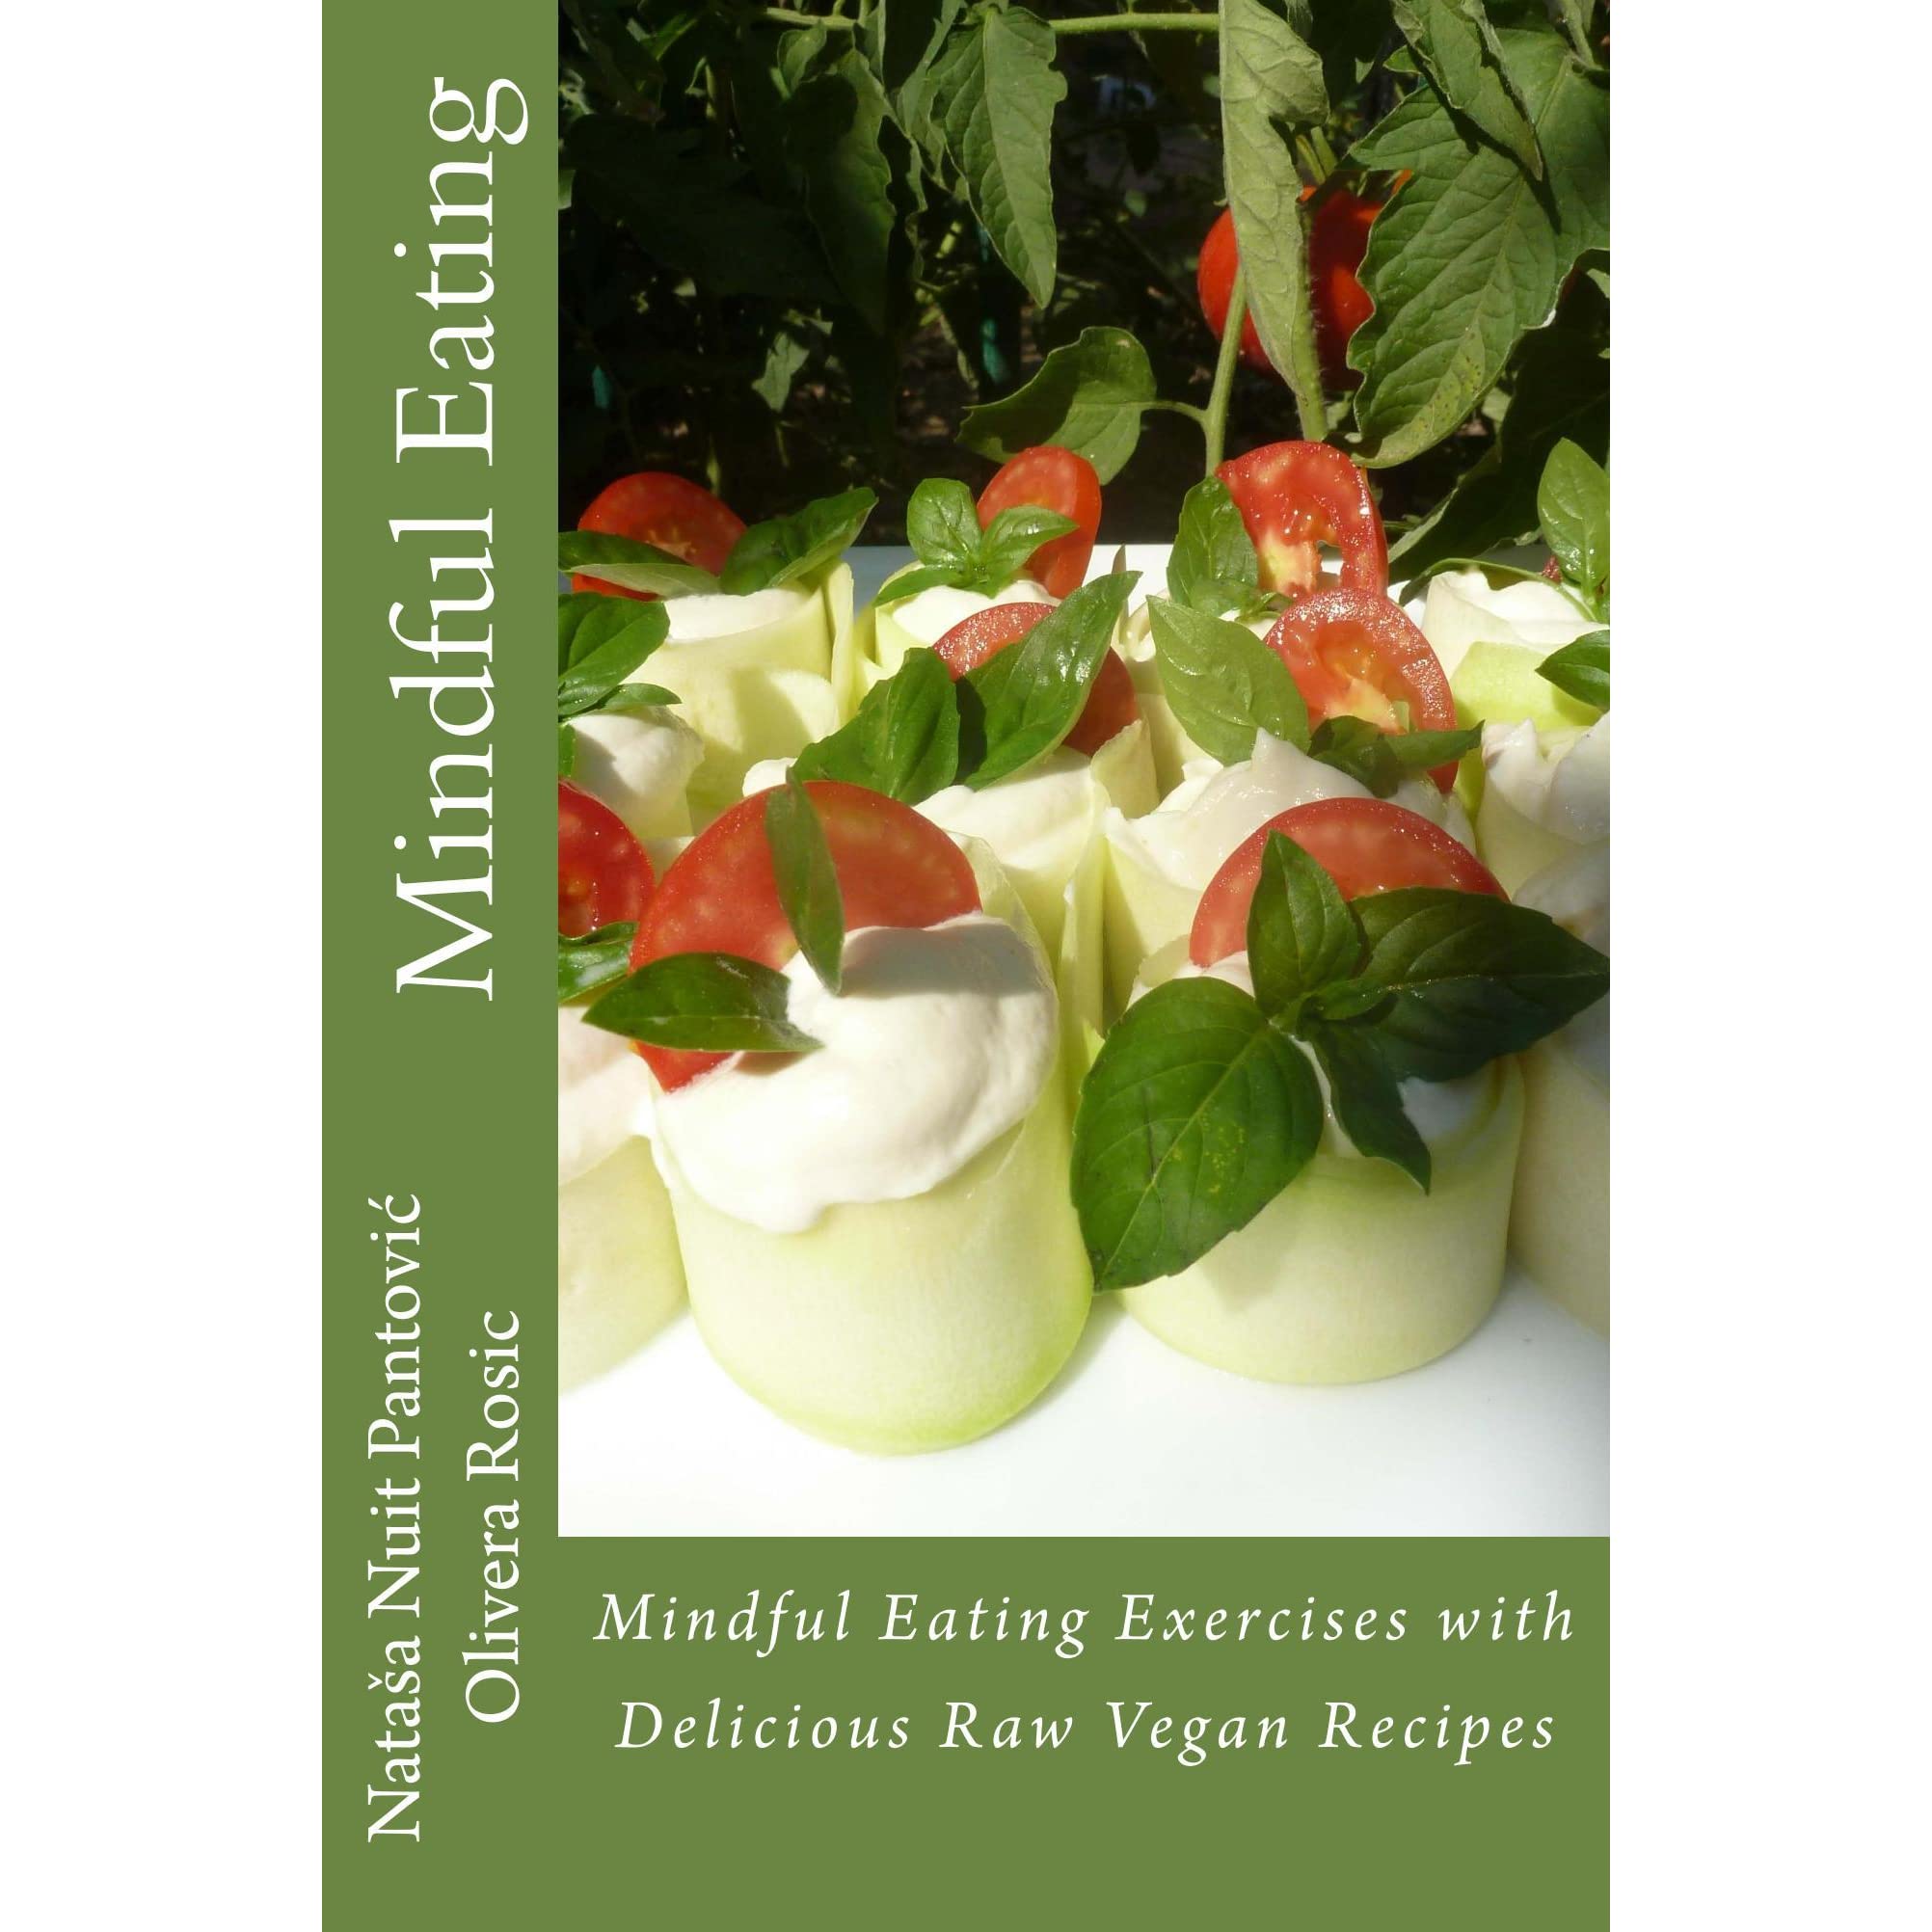 Mindful Eating: Mindful Eating Exercises with Delicious Raw Vegan Recipes